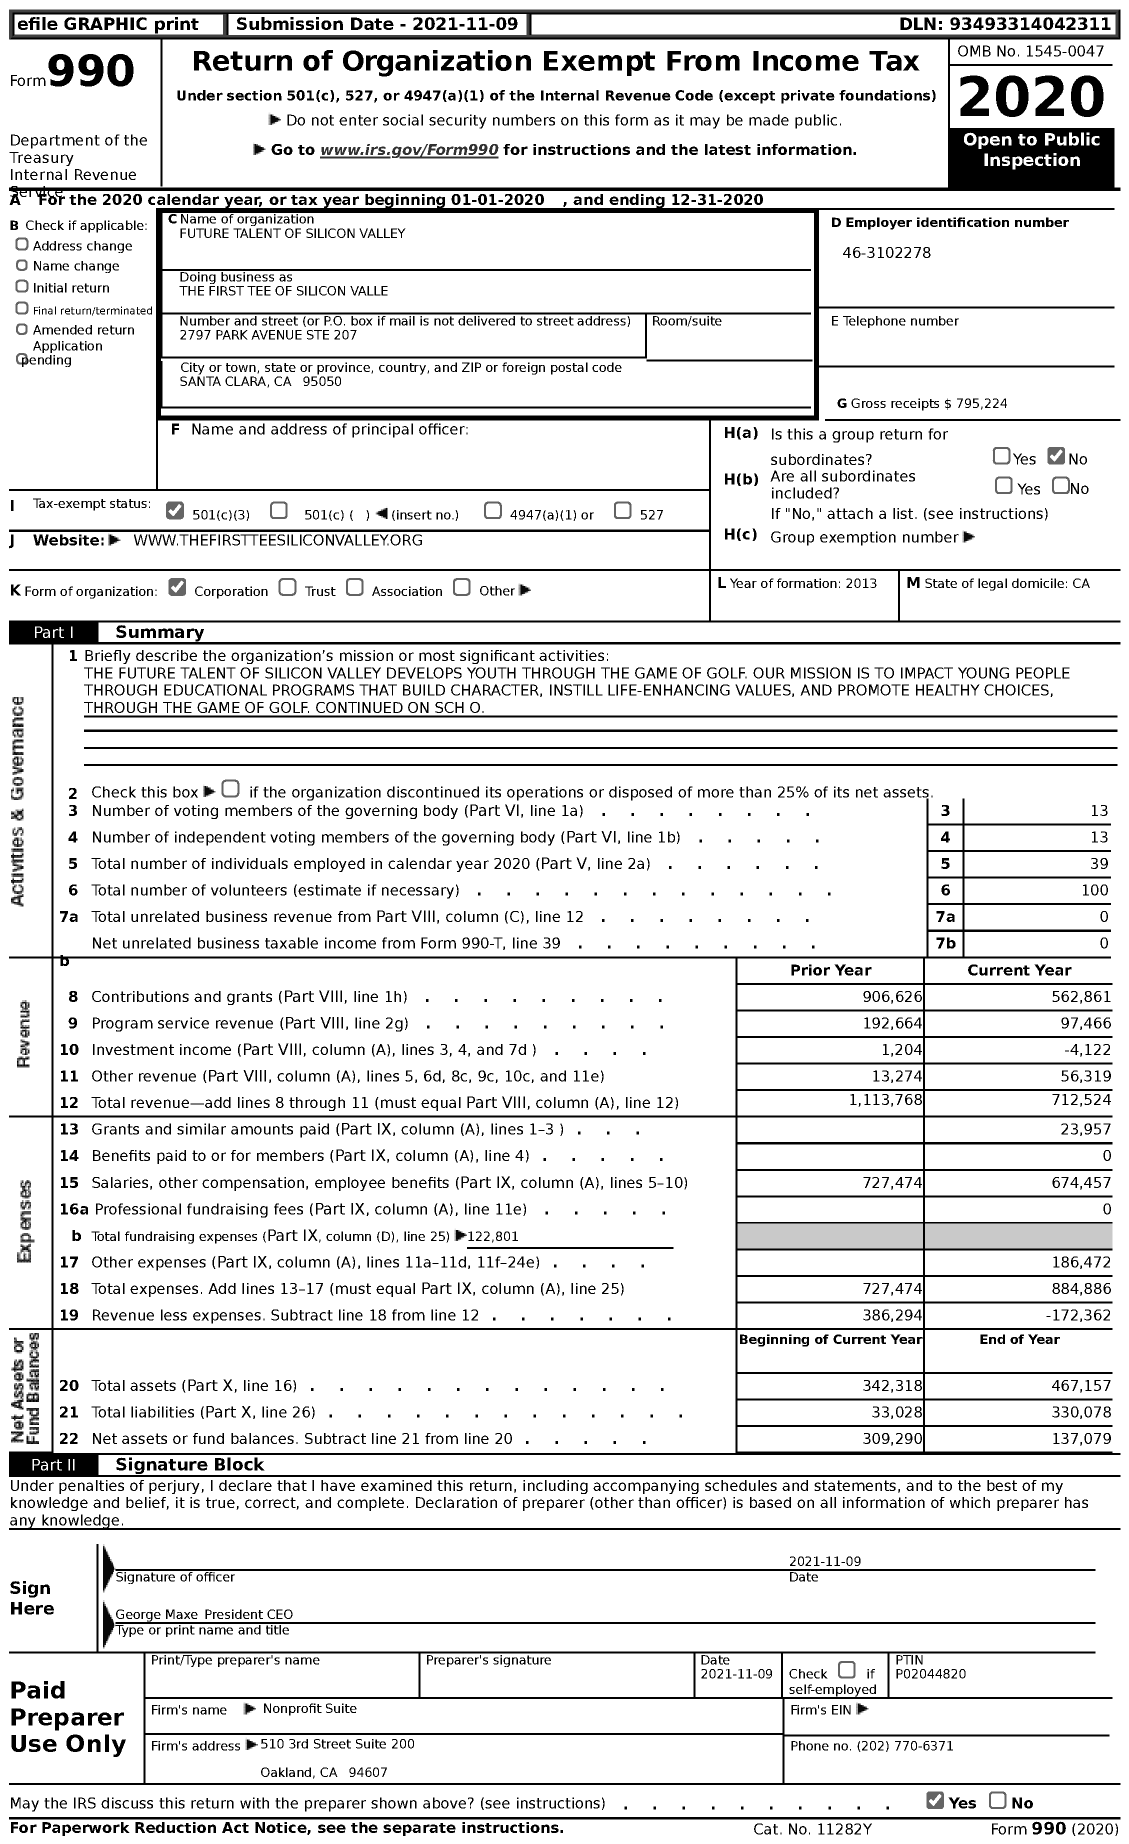 Image of first page of 2020 Form 990 for The First Tee of Silicon Valley